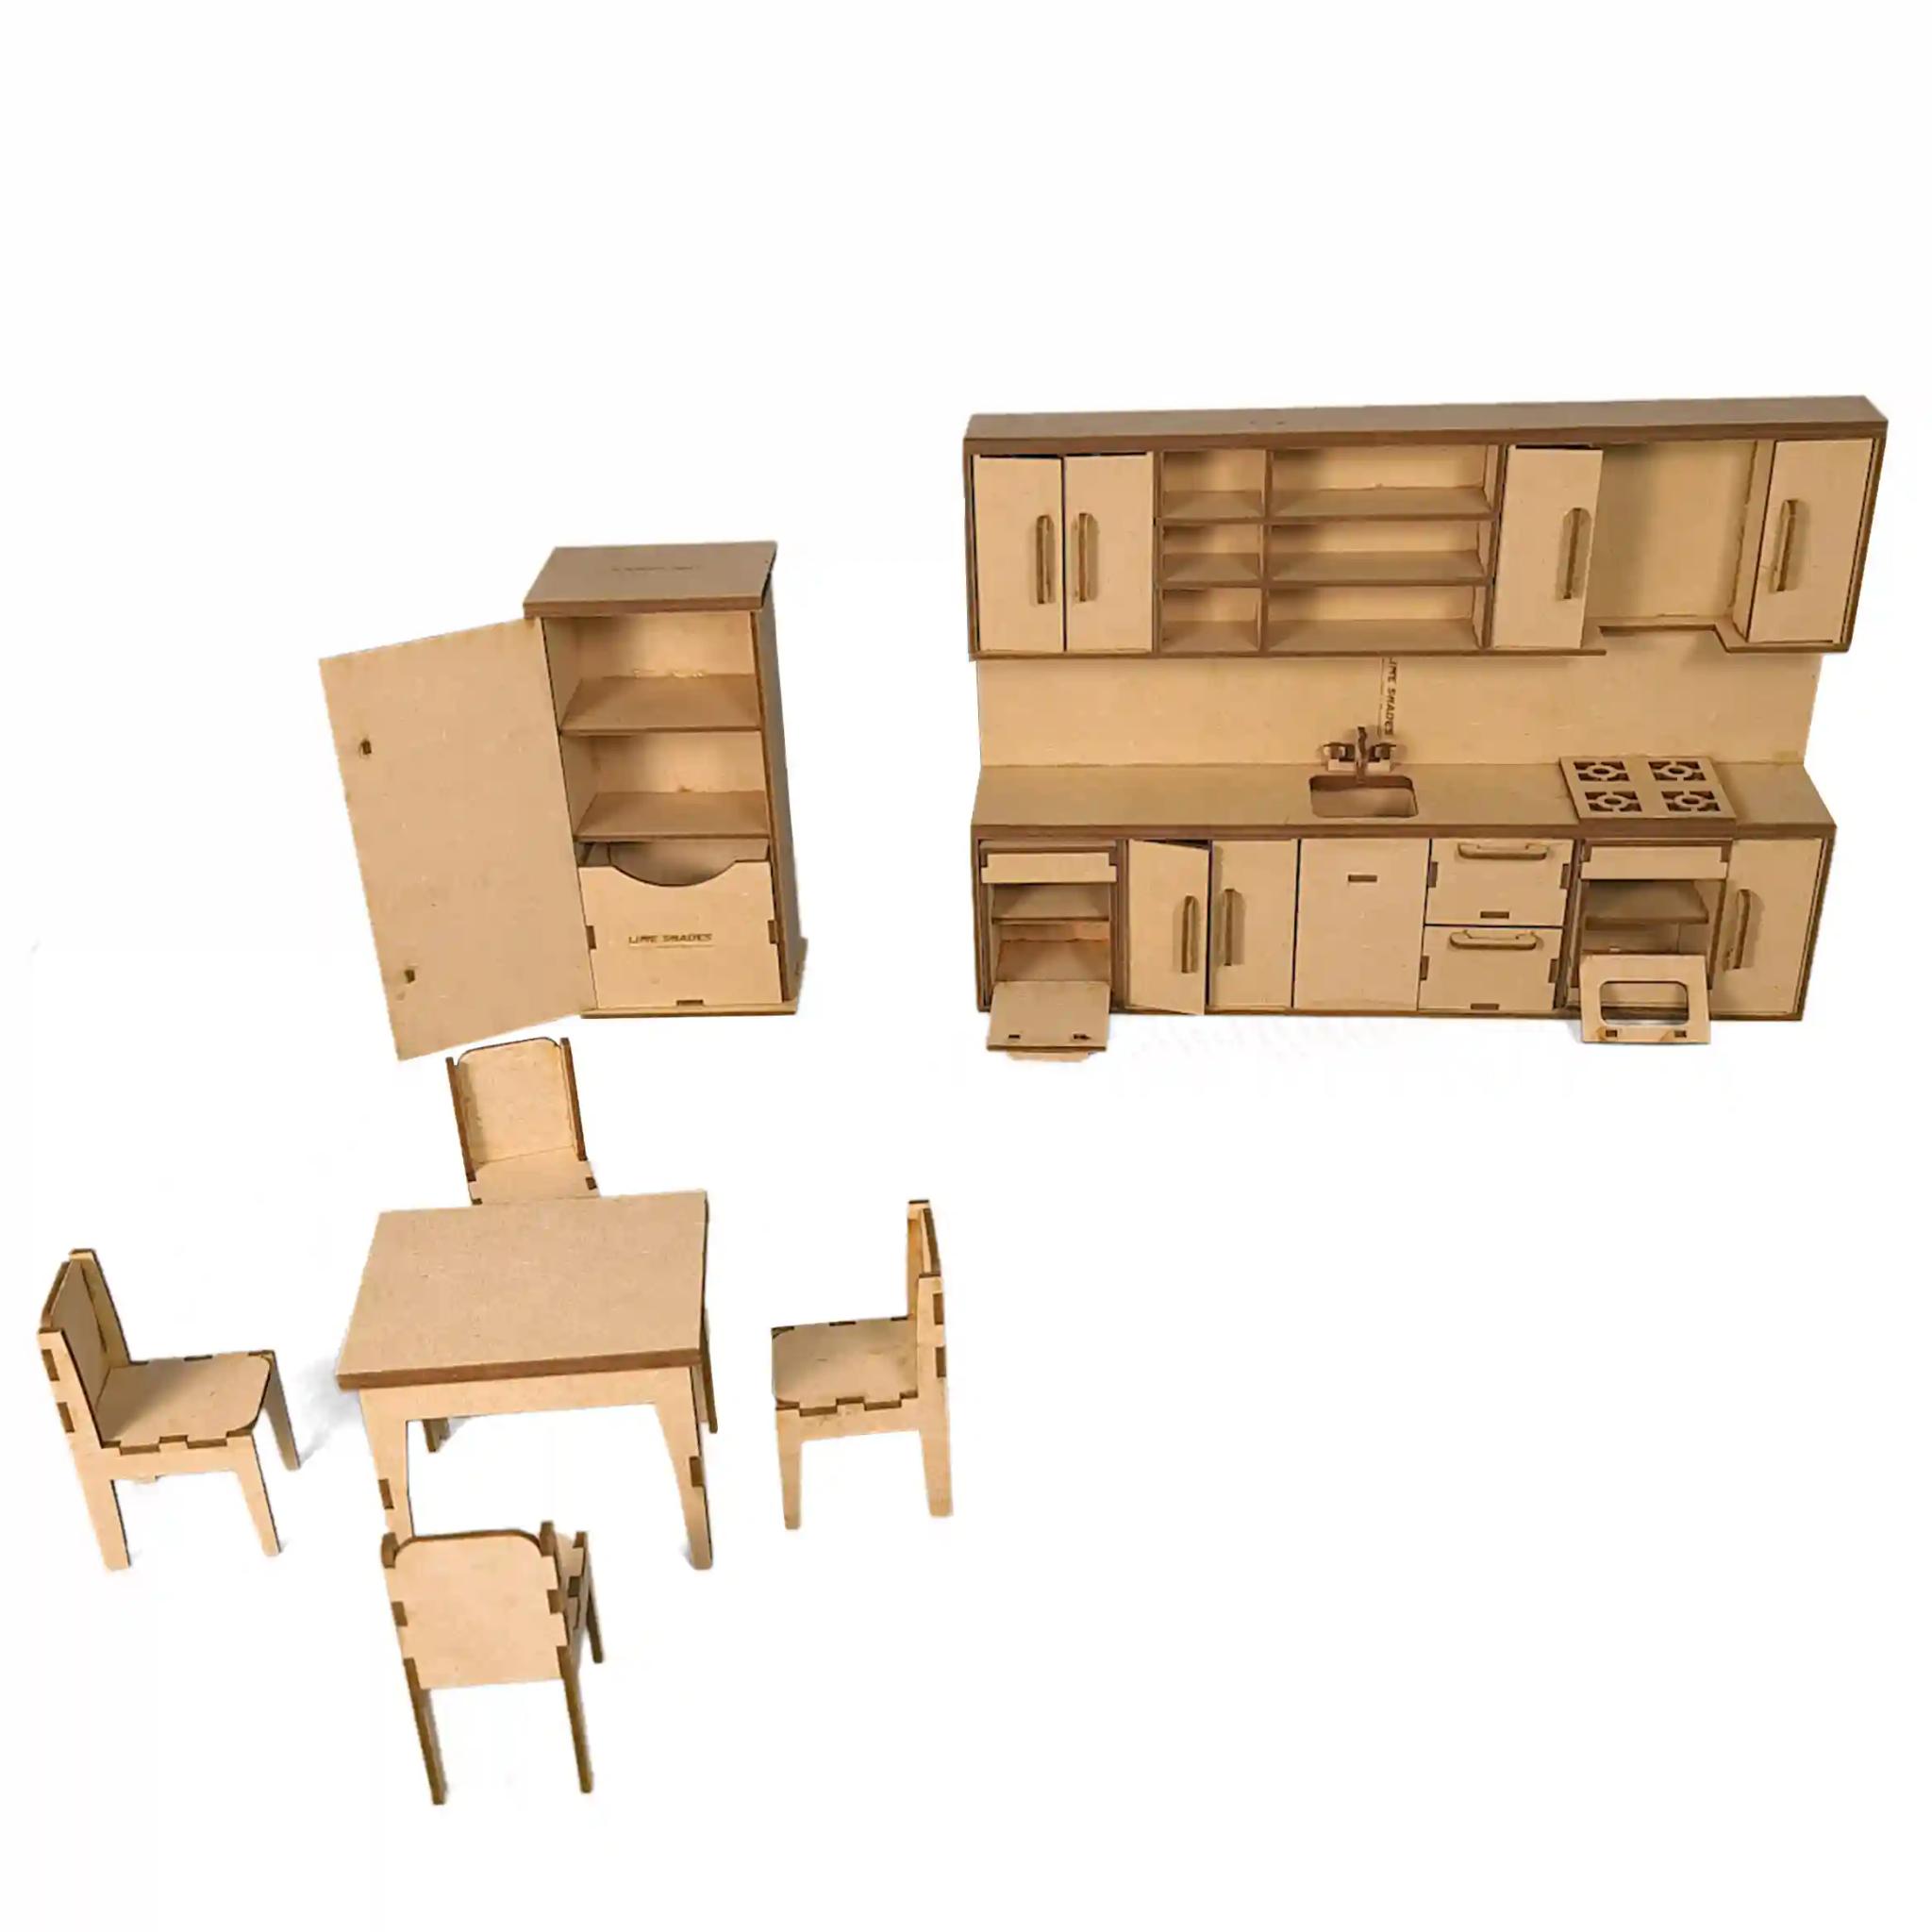 Complete Modular Miniature Kitchen Set with Set of 7 Miniature Furniture in MDF Wood for Playing and Decoration